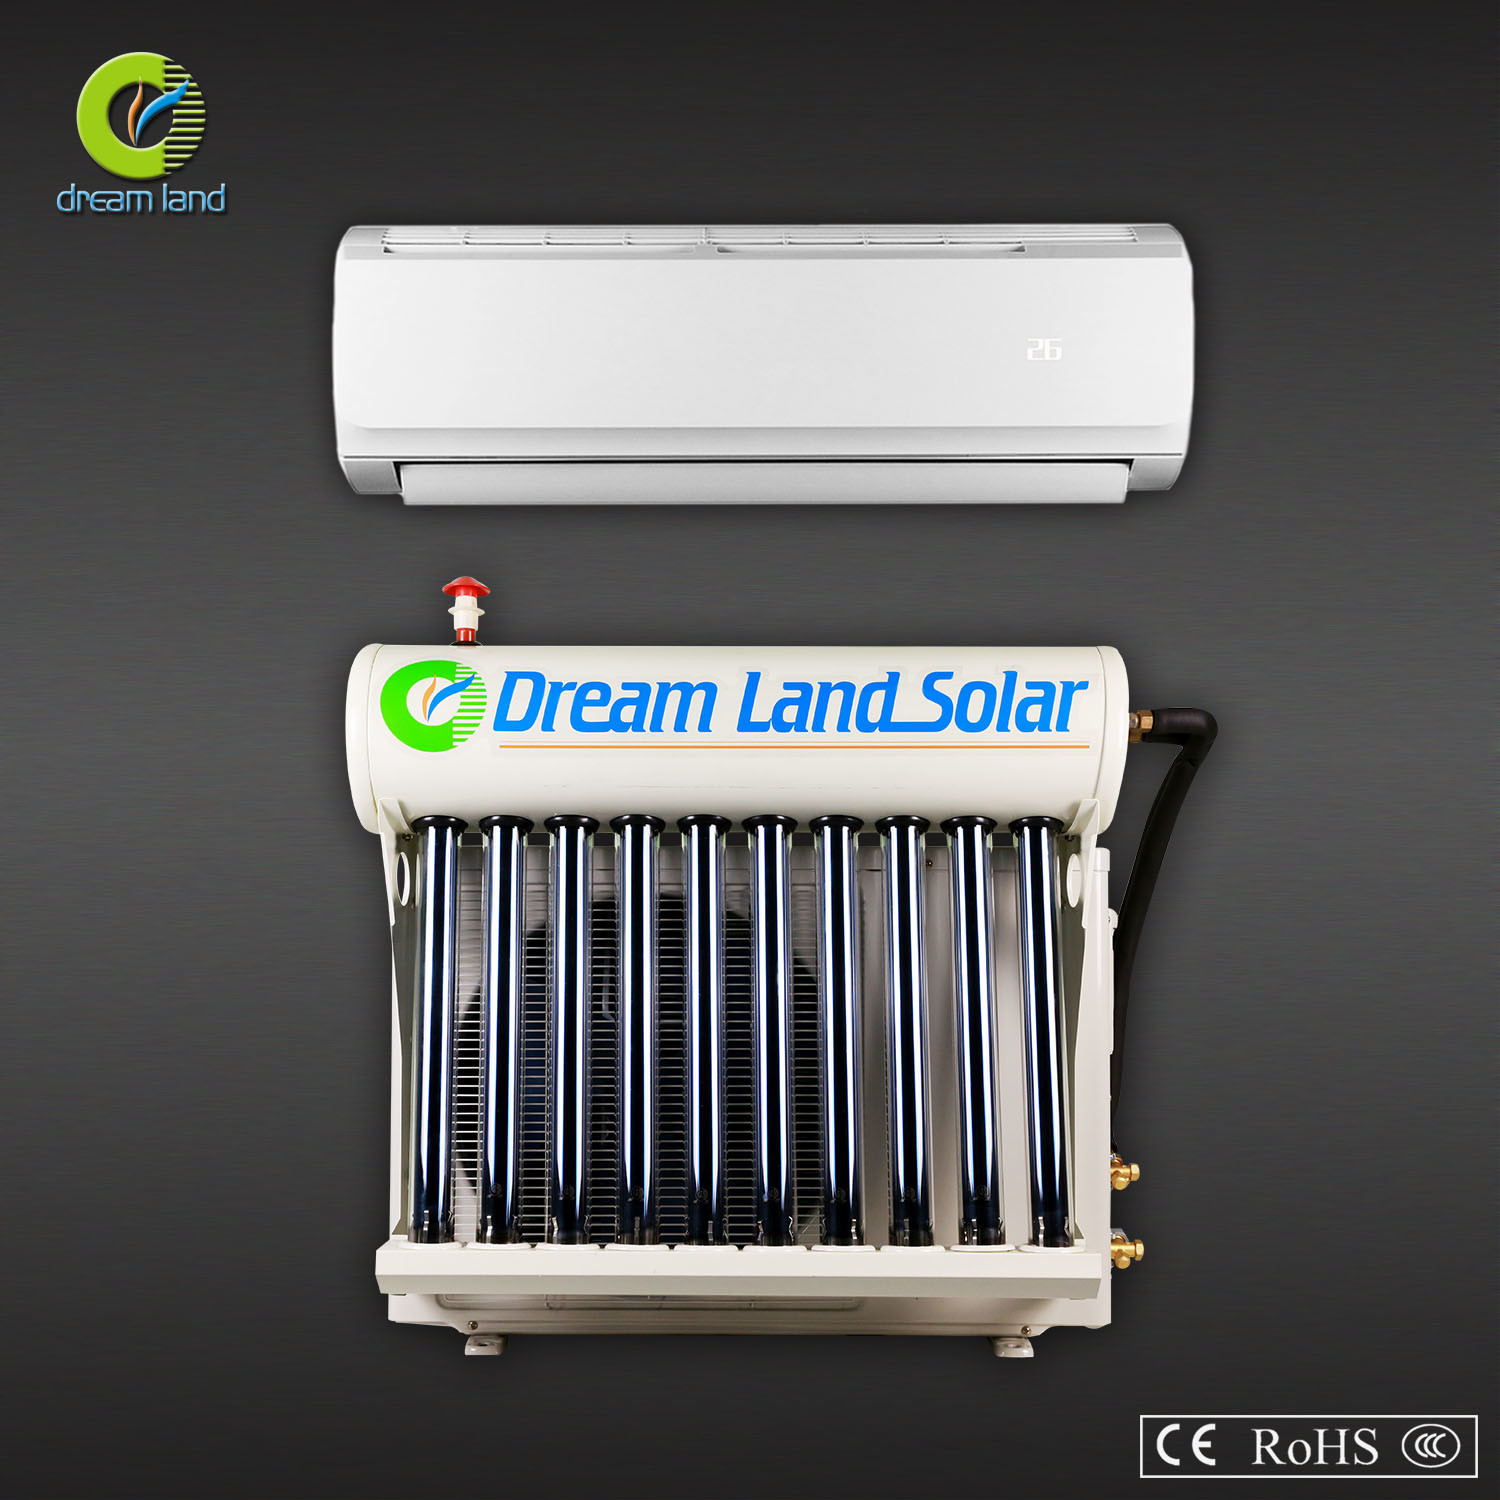 Vacuum Tube Wall-Installed Air Conditioner Tkf (R) -60gw 60Hz